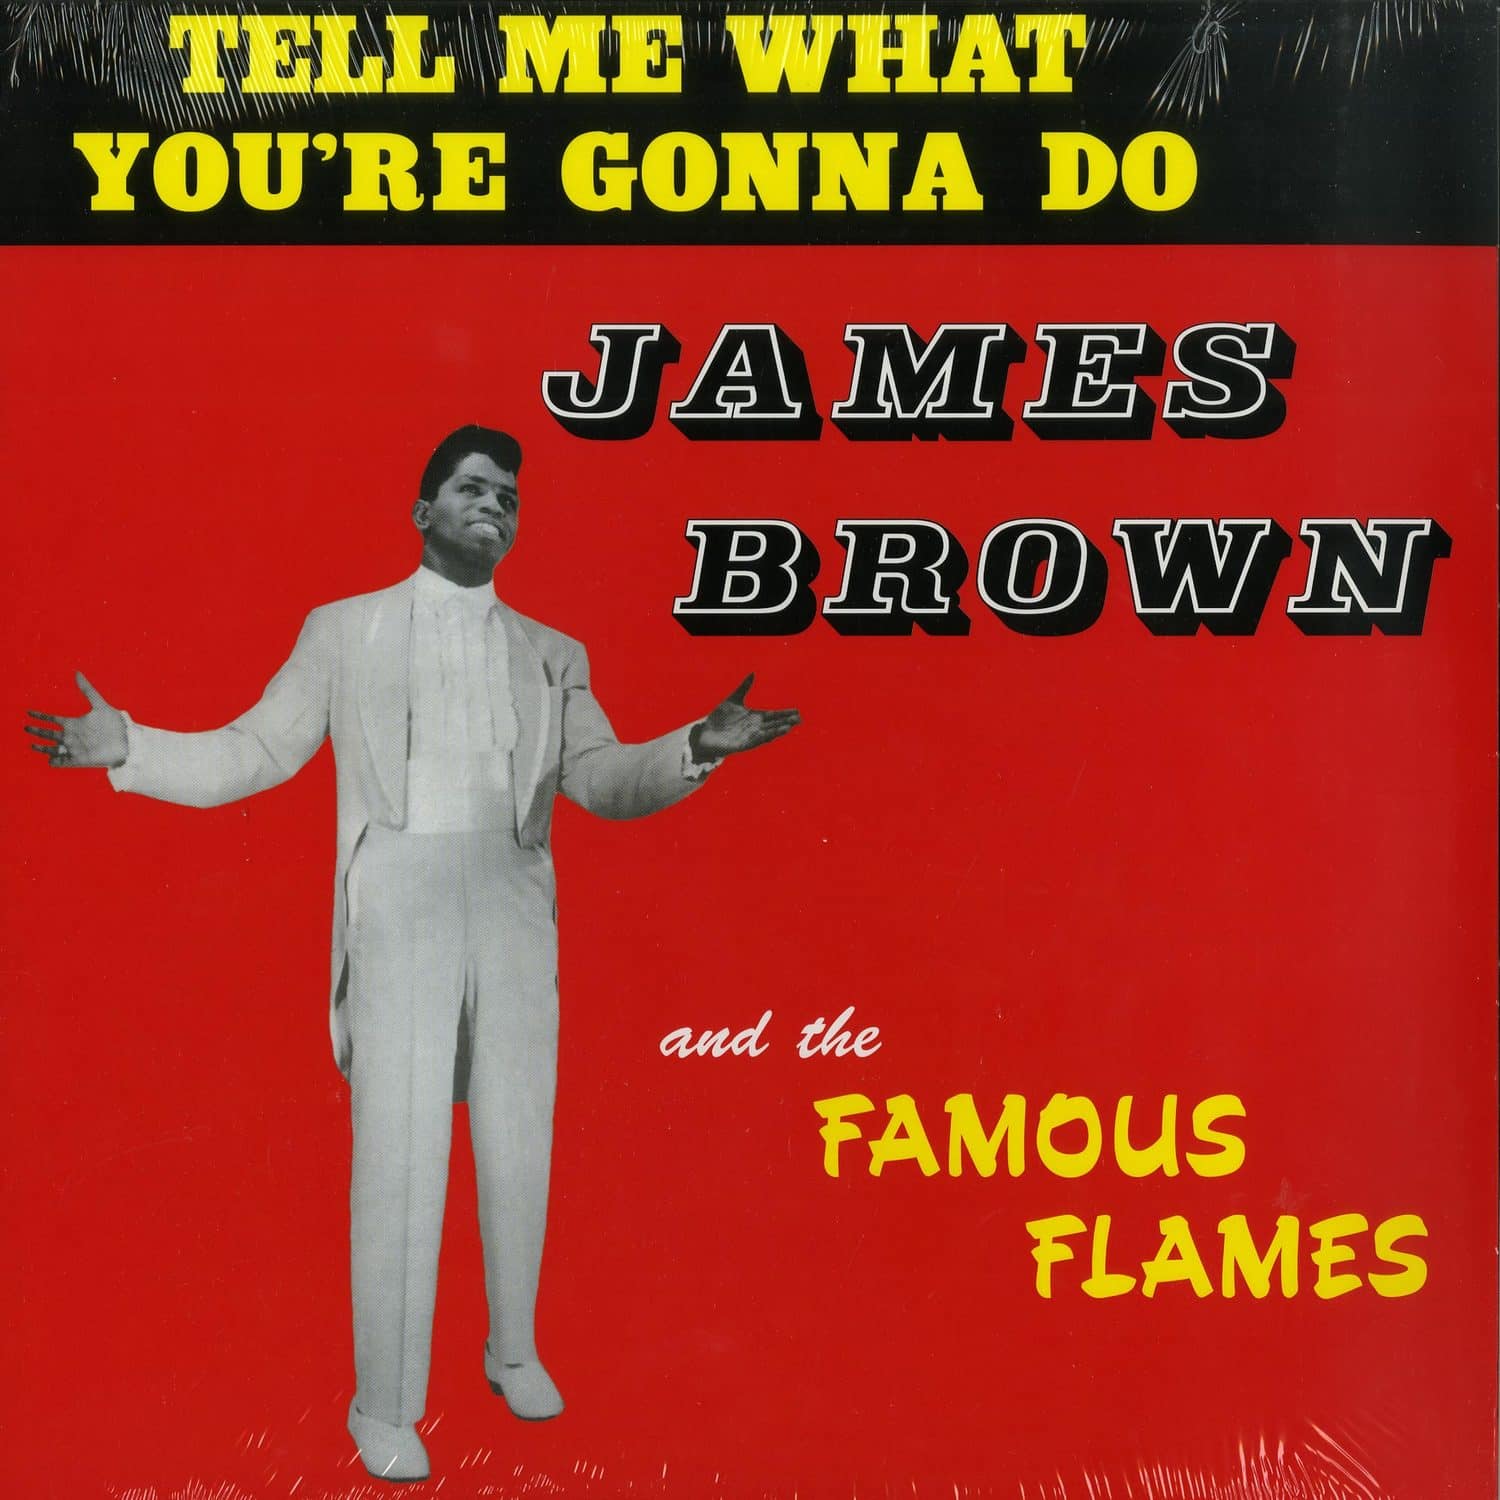 James Brown & The Famous Flames - TELL ME WHAT YOURE GONNA DO 